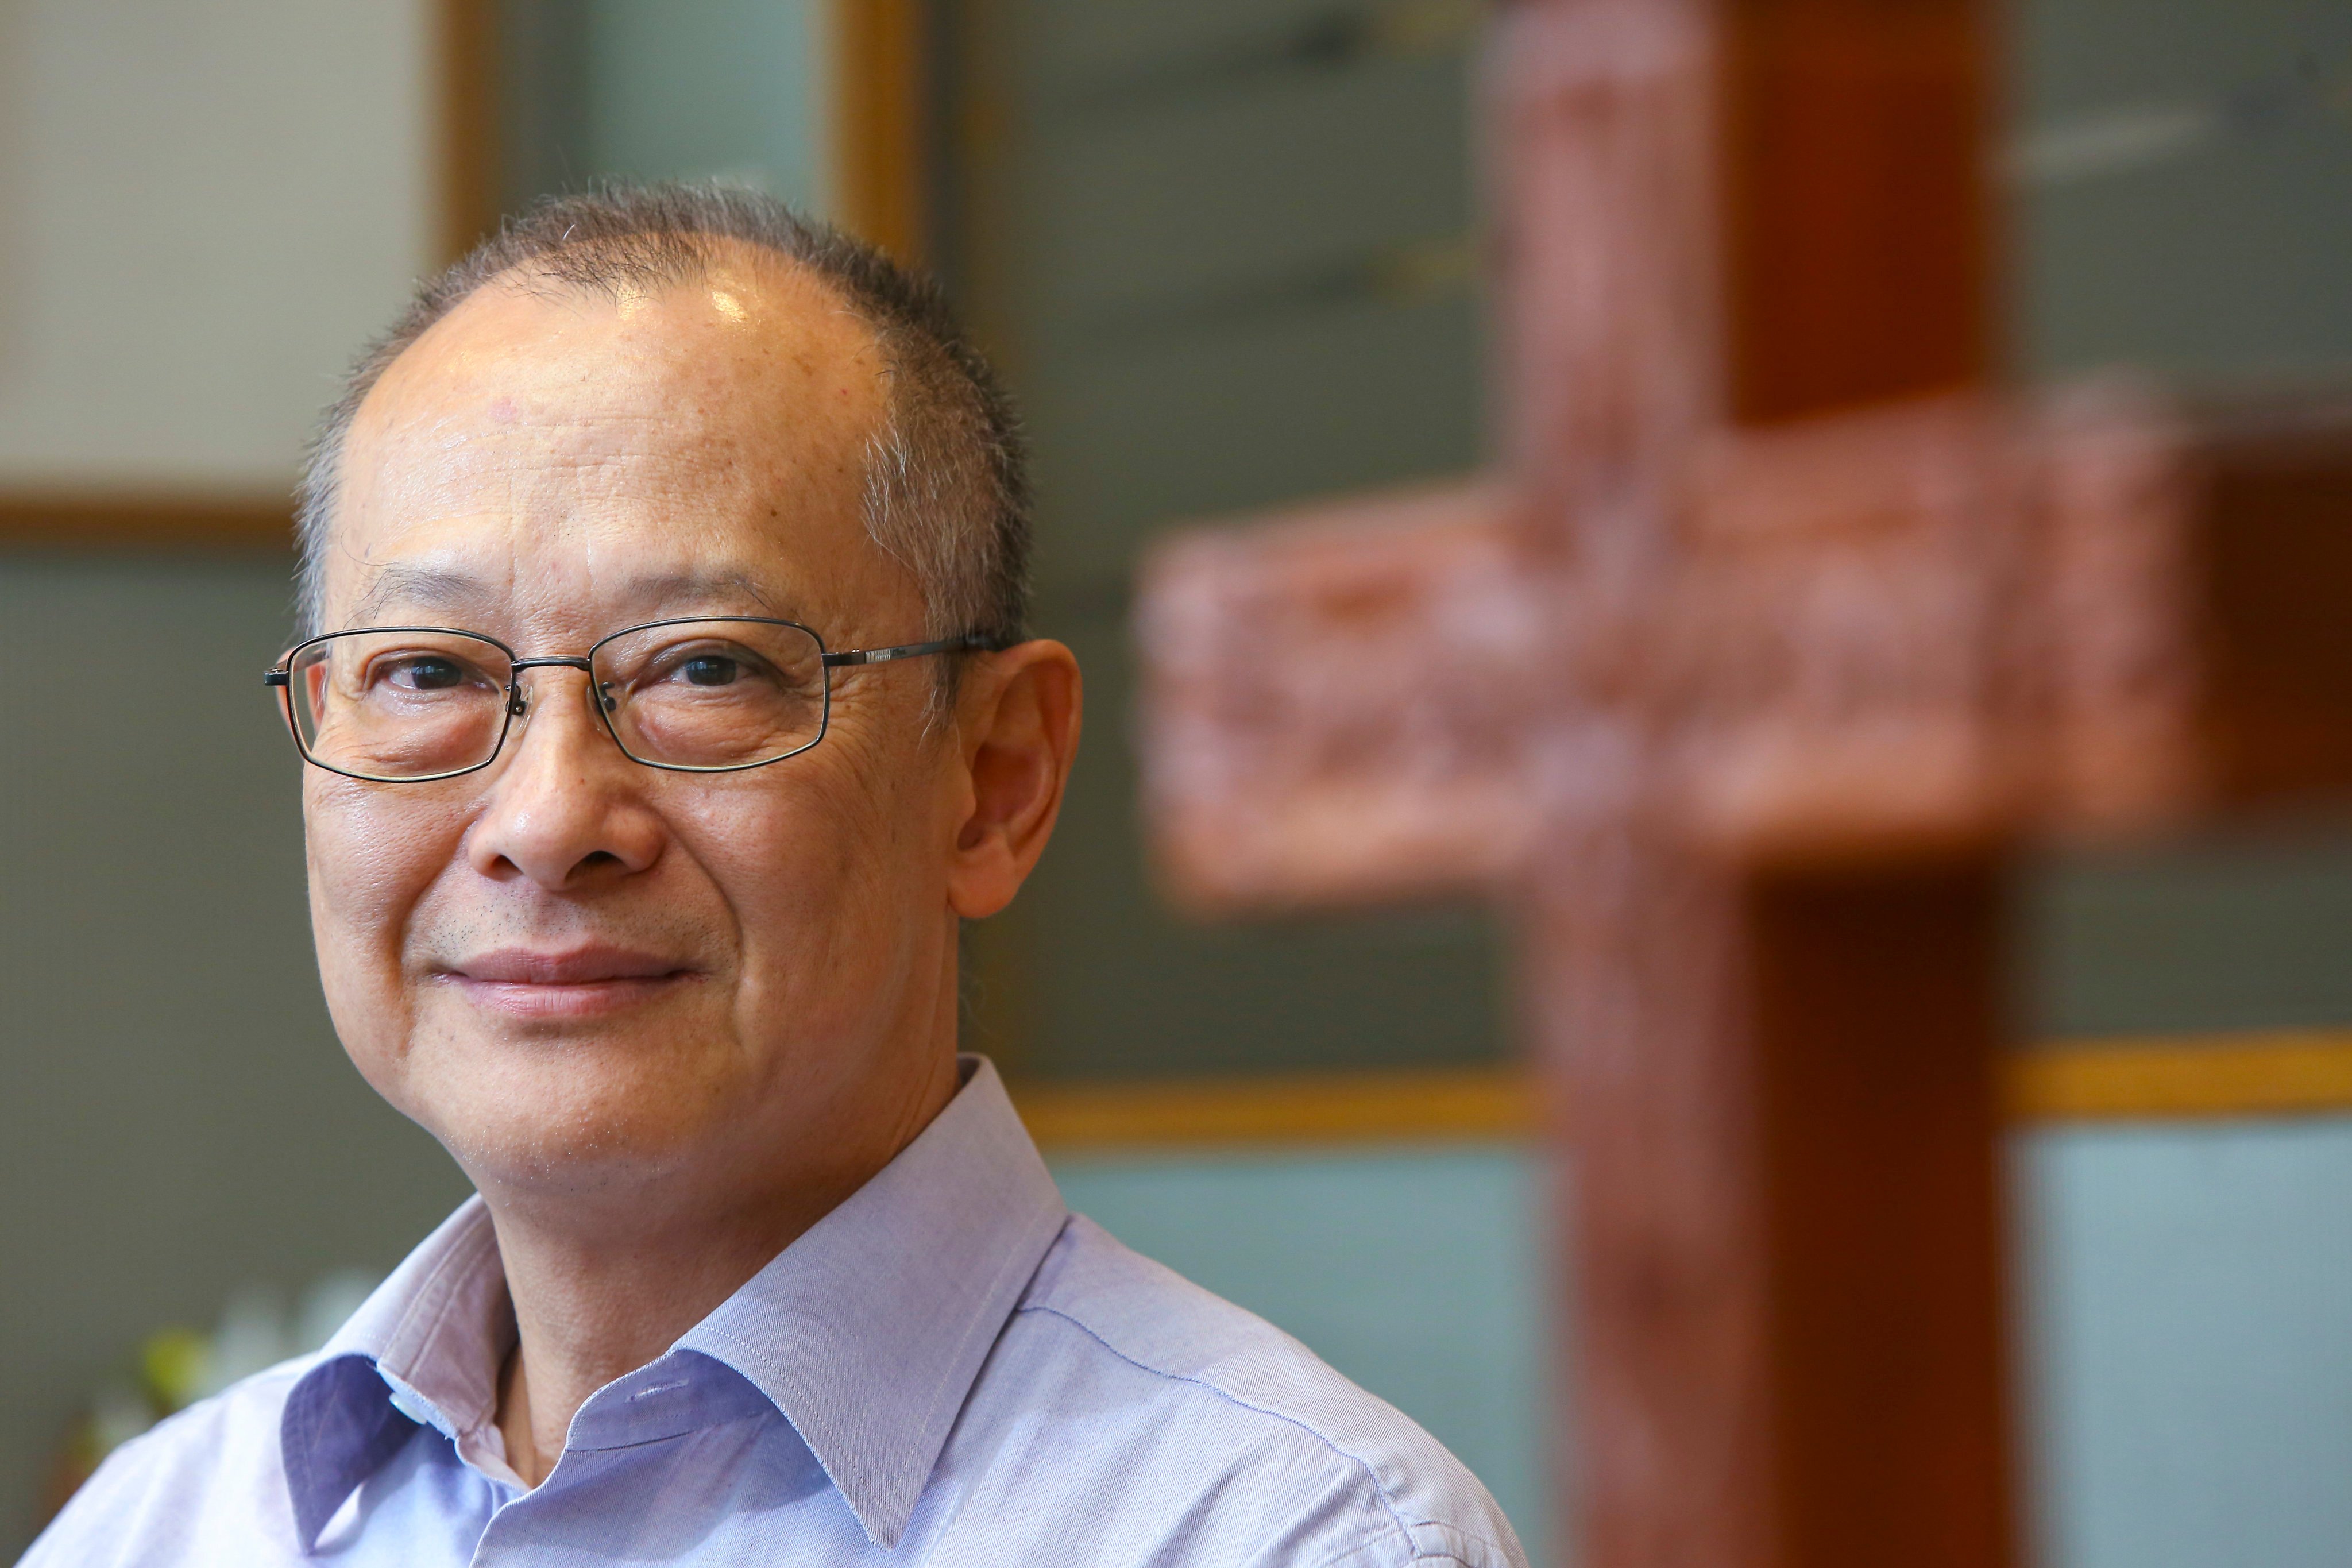 Reverend Yuen Tin-yau in 2015. He joined the Methodist Church in 1978 and served as its president from 2012 to 2015, before retiring in 2016. Photo: Edmond So